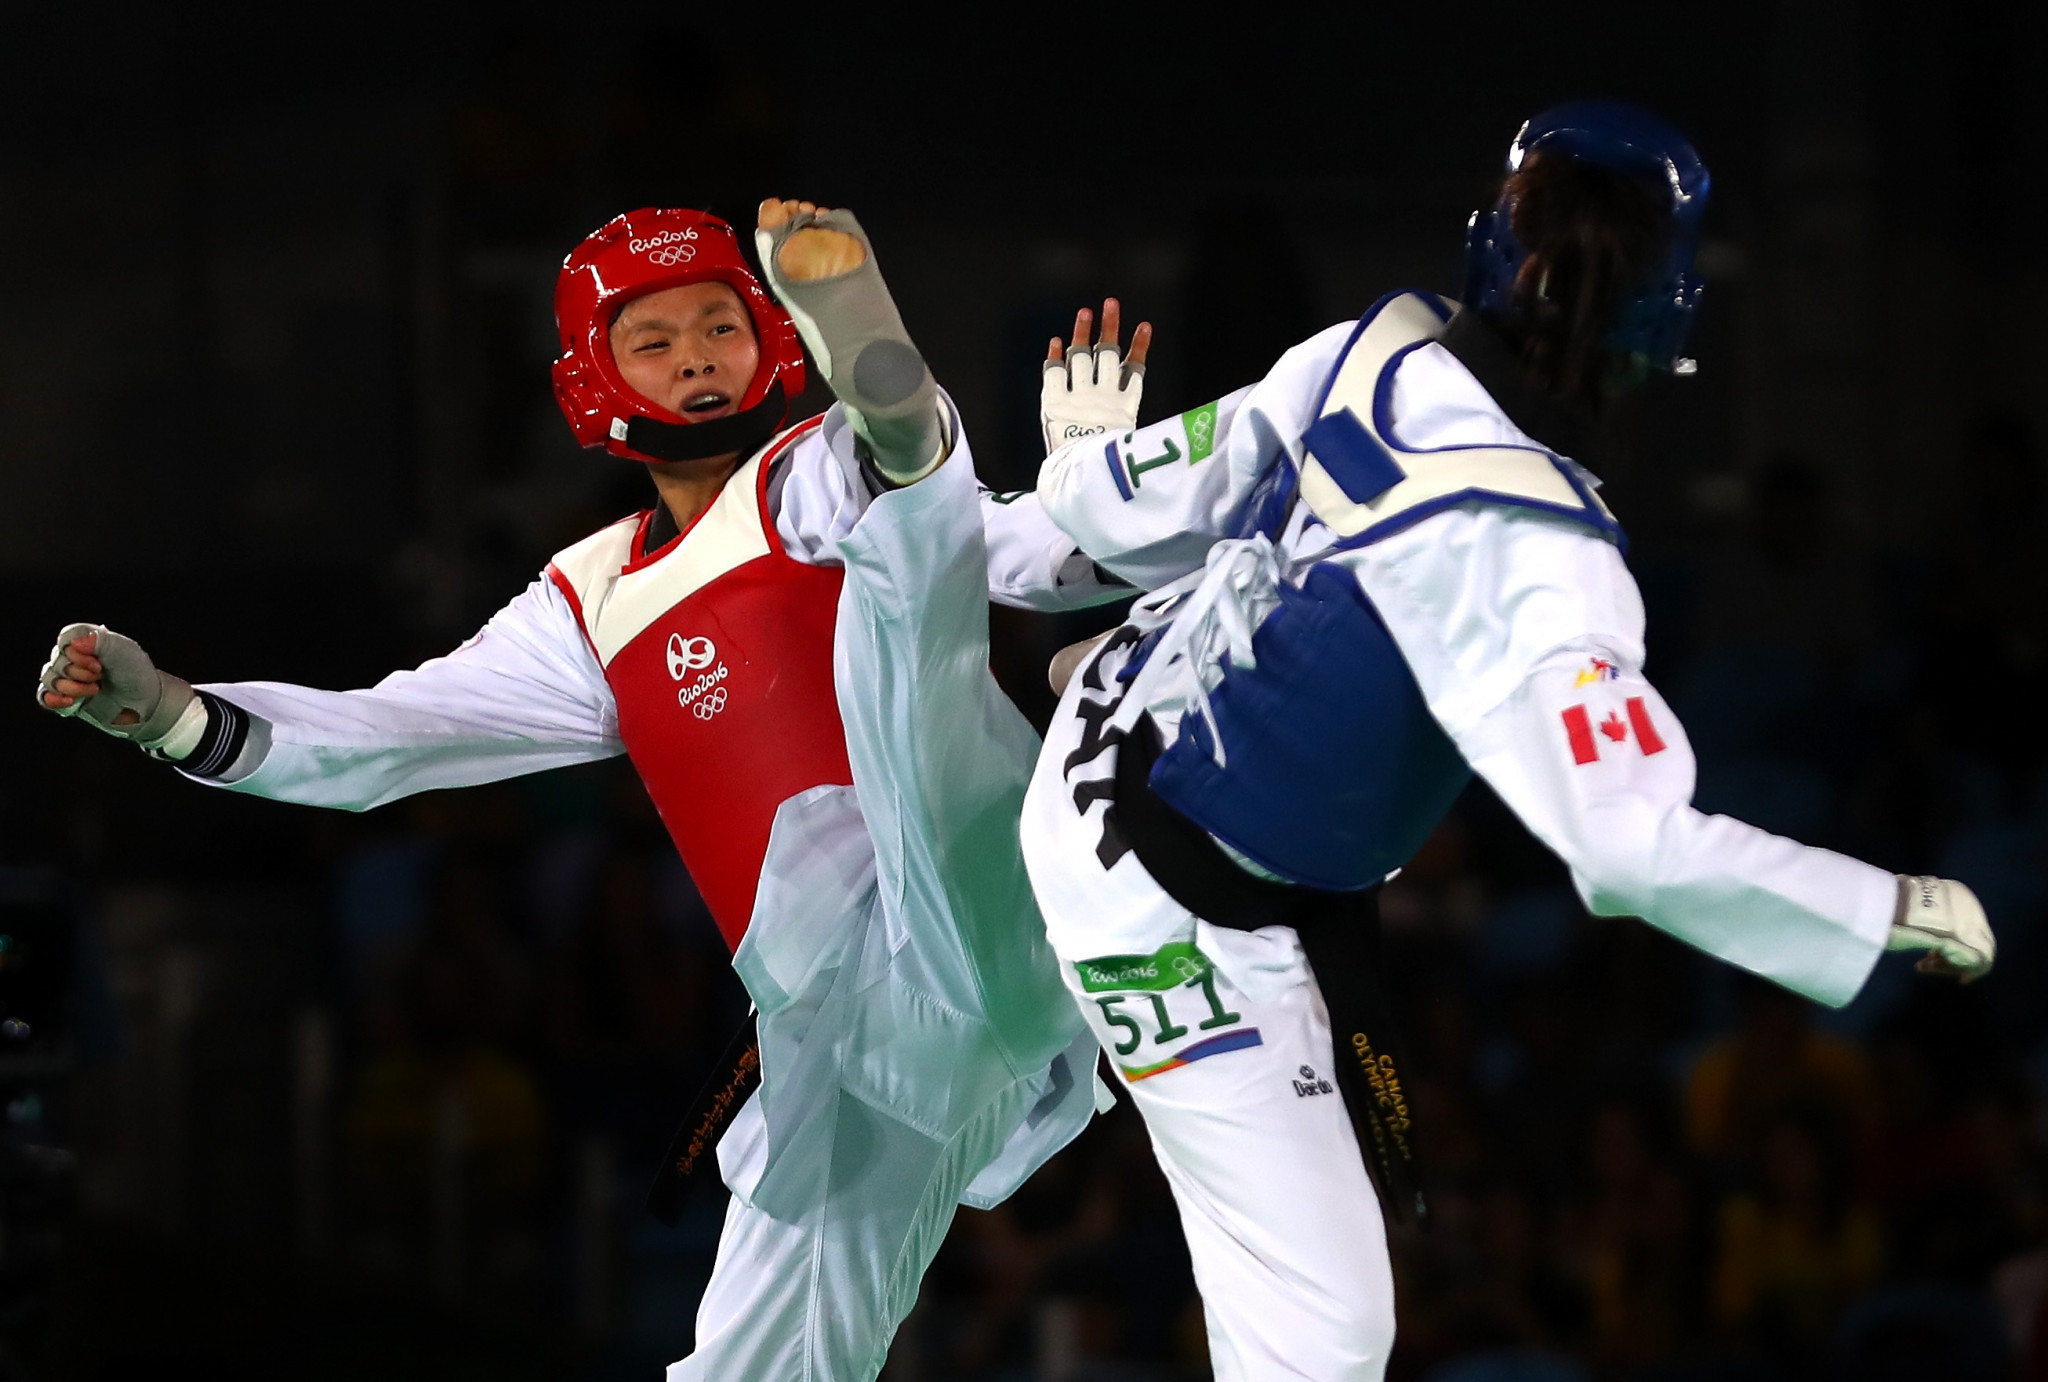 Trial of Canadian Olympic taekwondo coach accused of sexual assaults begins